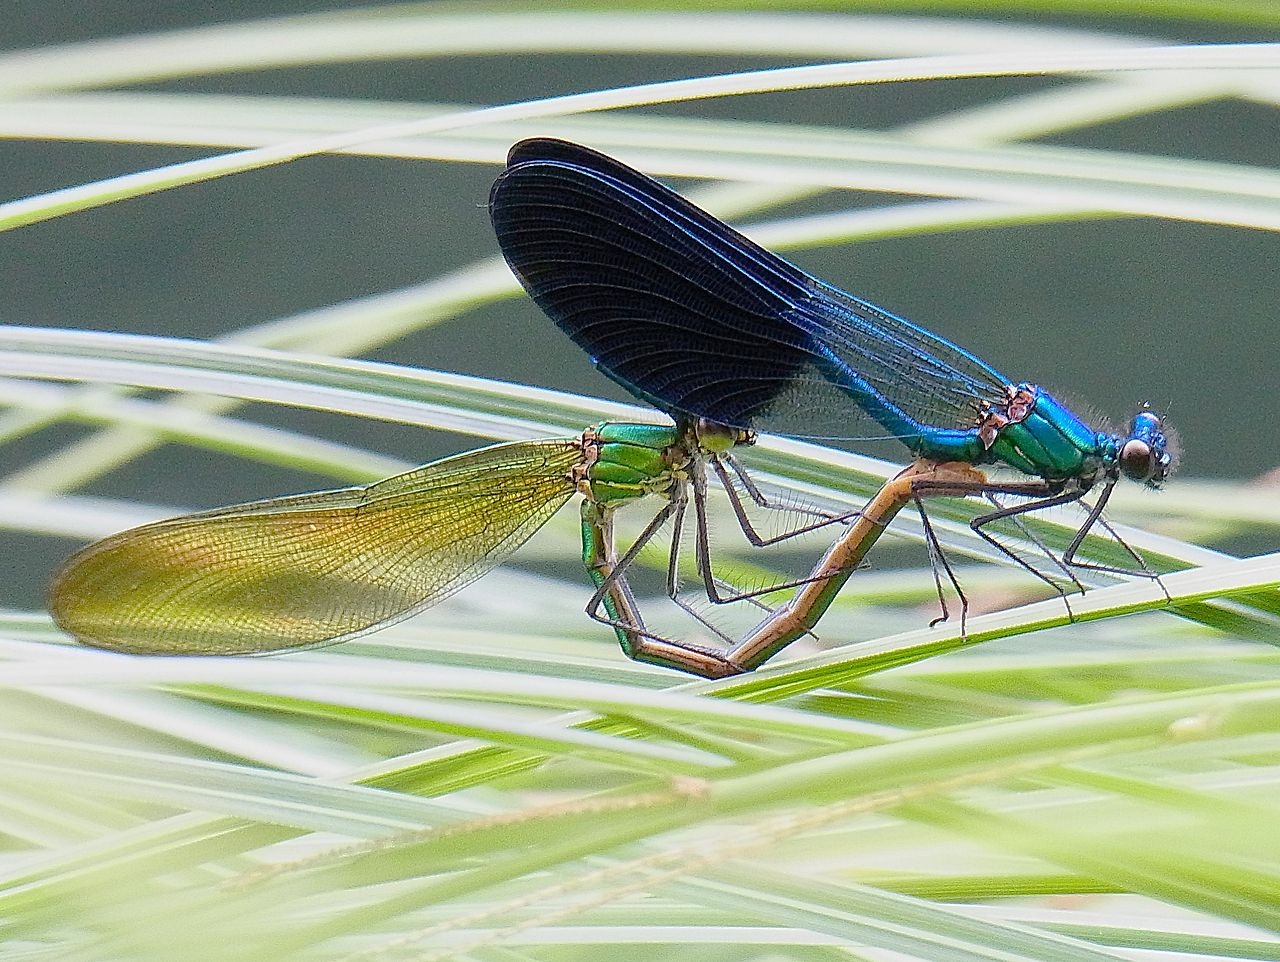 Calopteryx occitan - Calopteryx xanthostoma - <a href='https://commons.wikimedia.org/wiki/File:Calopteryx_xanthostoma_couple2.jpg'>Siga</a>, <a href='https://creativecommons.org/licenses/by-sa/3.0'>CC BY-SA 3.0</a>, via Wikimedia Commons - BioObs